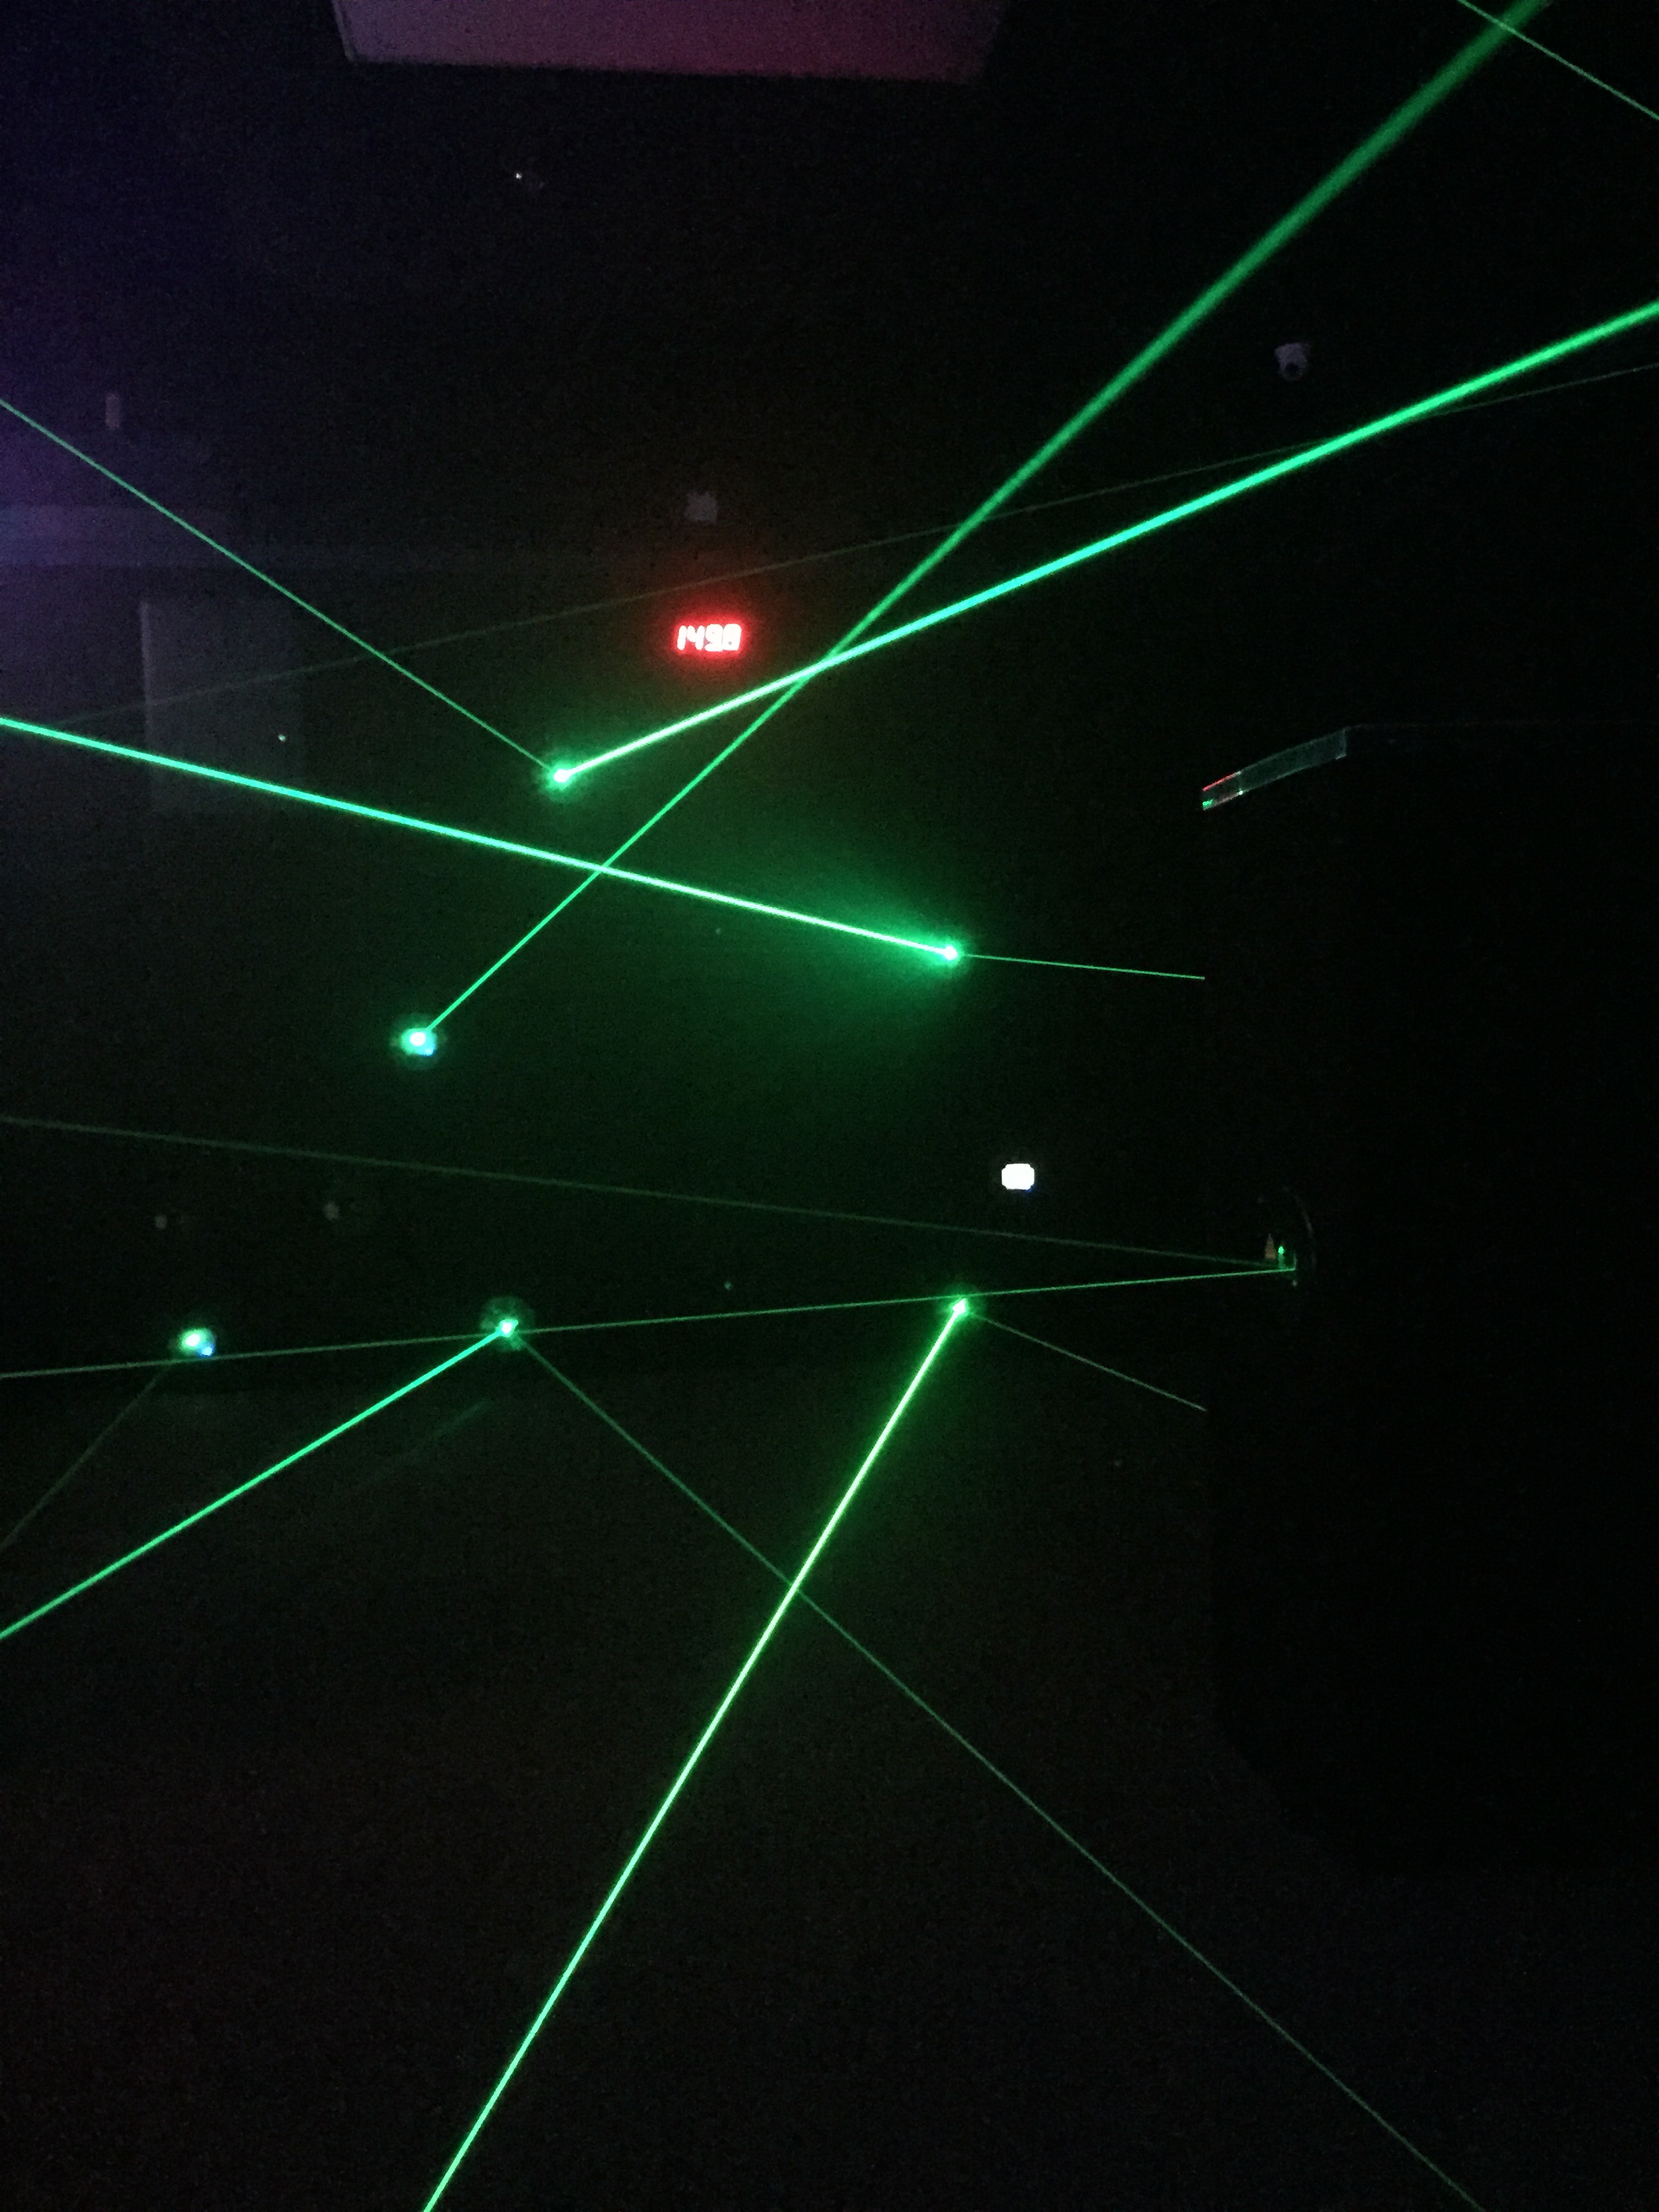 File:2017-10-14 13 32 00 Laser motion detectors in a game room in  Chantilly, Fairfax County, Virginia.jpg - Wikimedia Commons